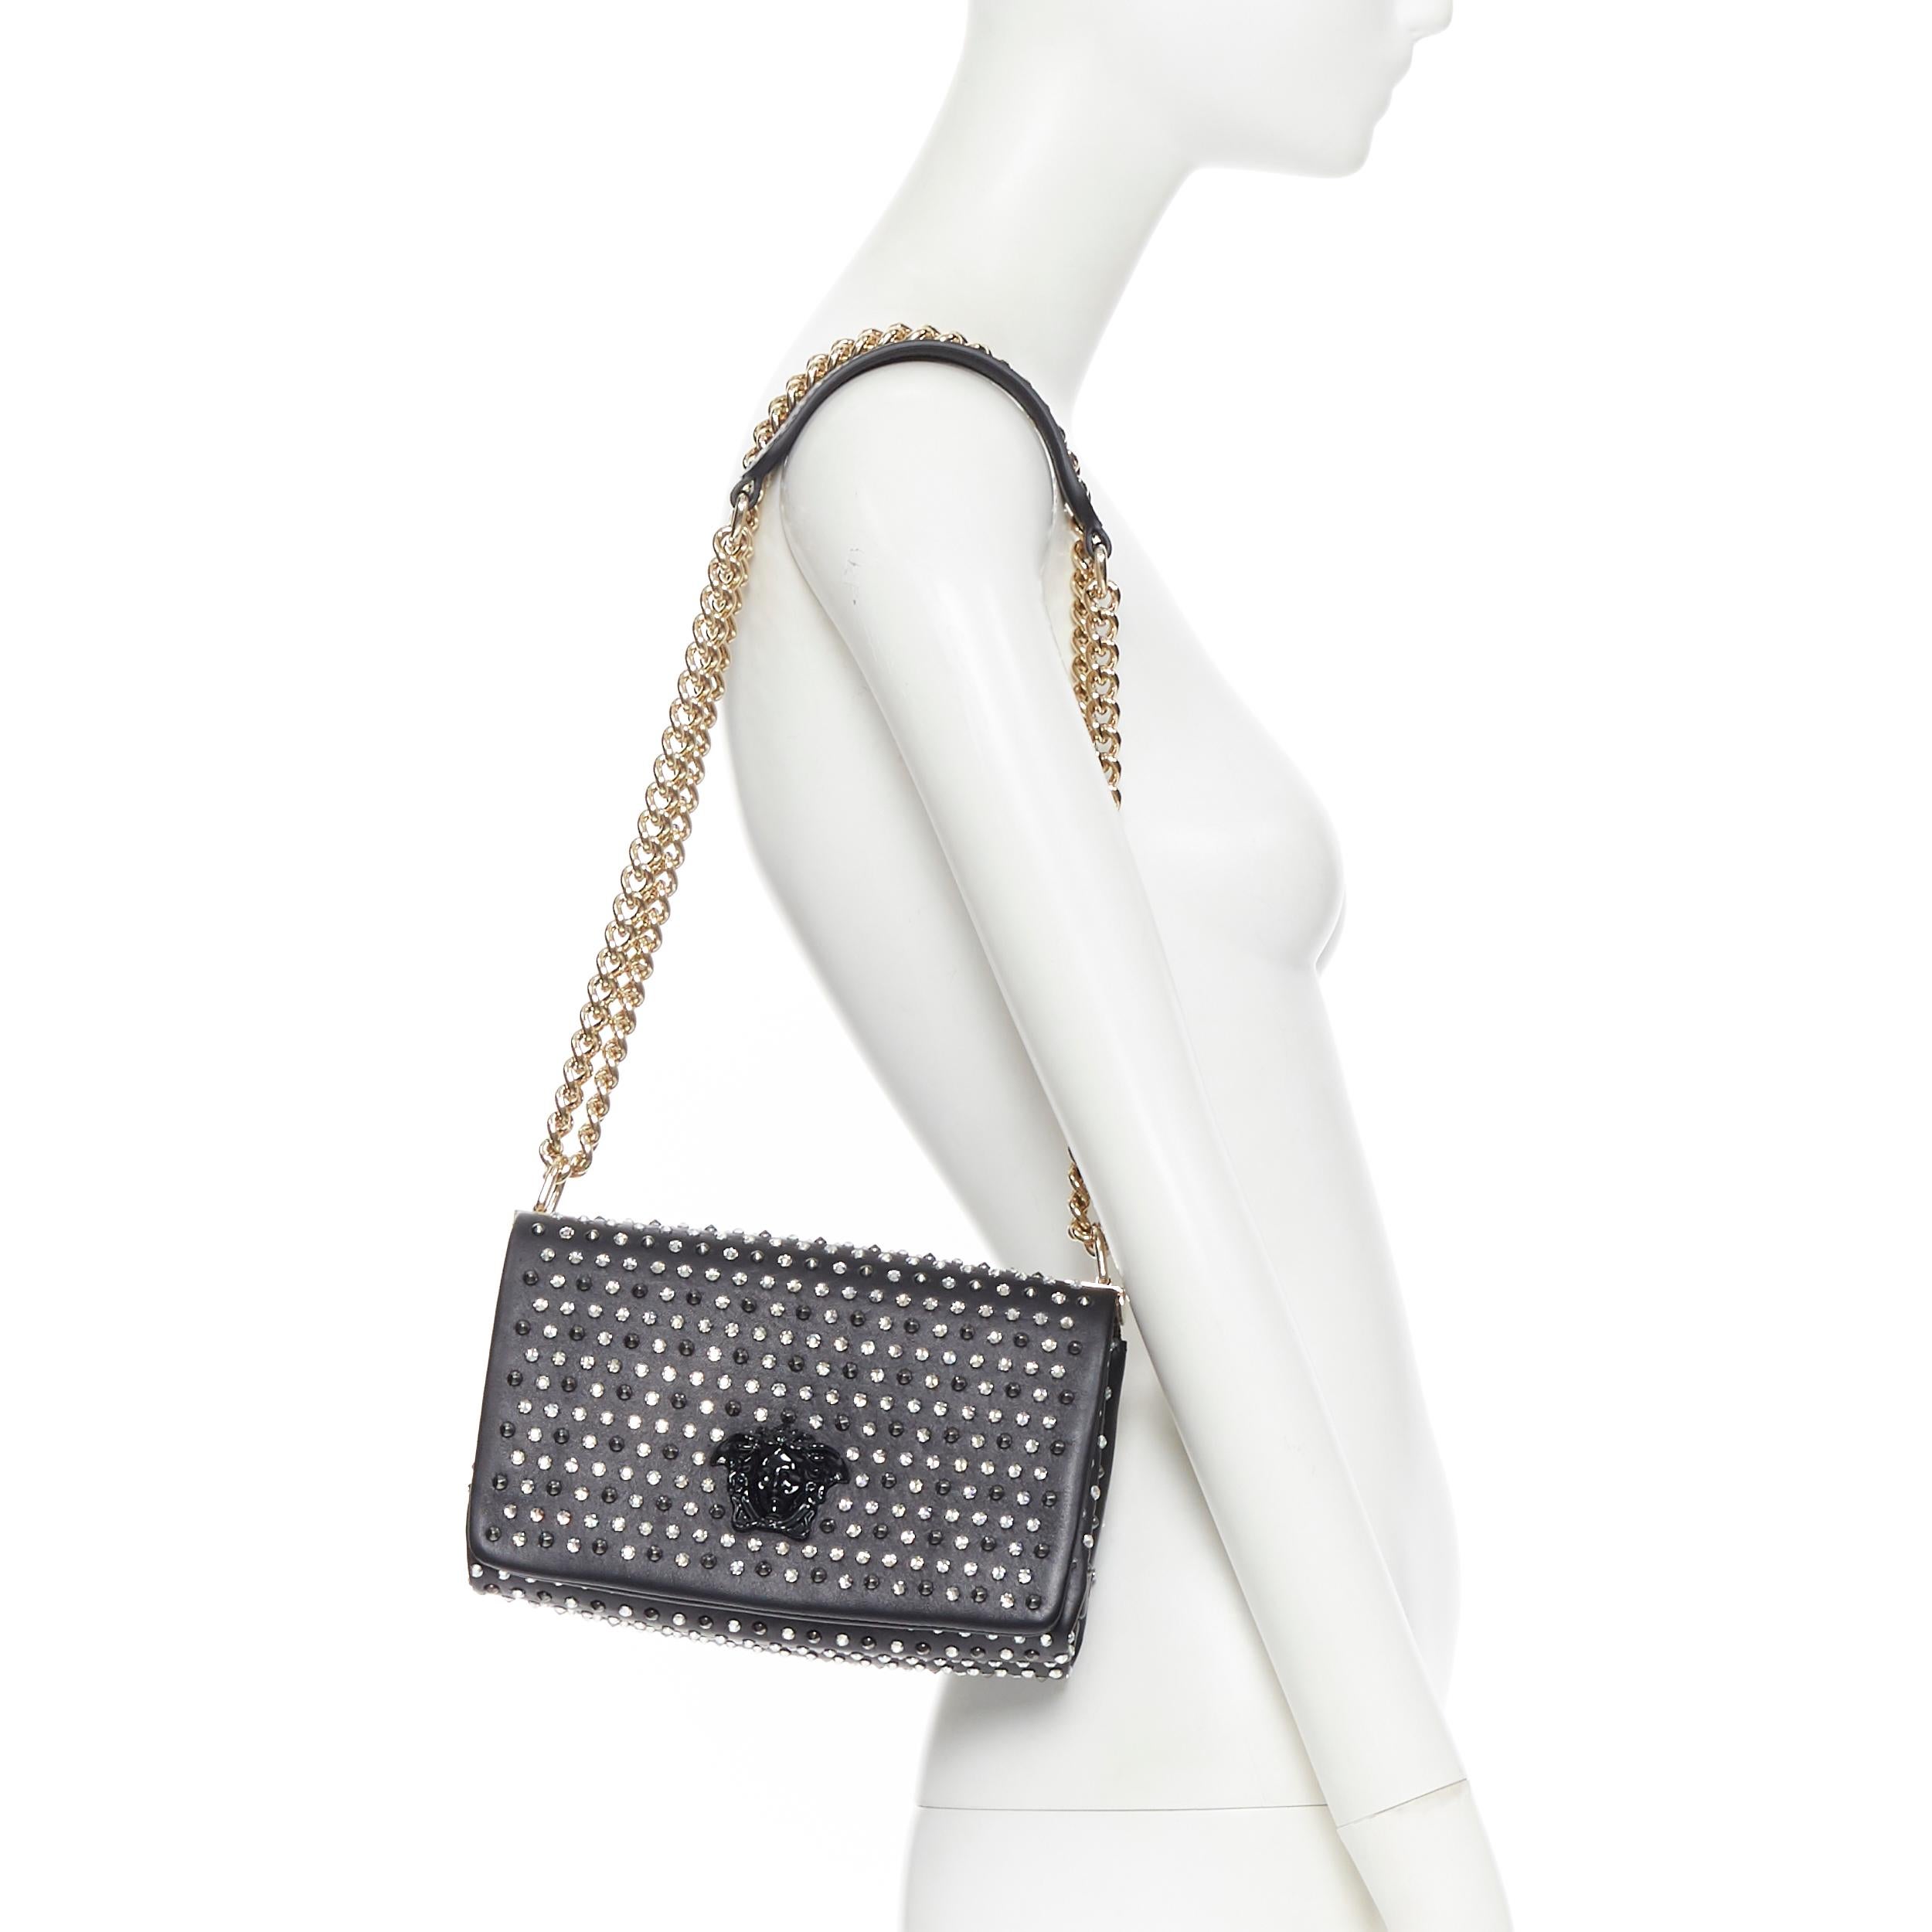 new VERSACE Palazzo Medusa black calf strass crystal spike stud shoulder bag
Brand: Versace
Designer: Donatella Versace
Model Name / Style: Palazzo Medusa flap
Material: Leather
Color: Black
Pattern: Solid
Closure: Magnetic
Extra Detail: Feature